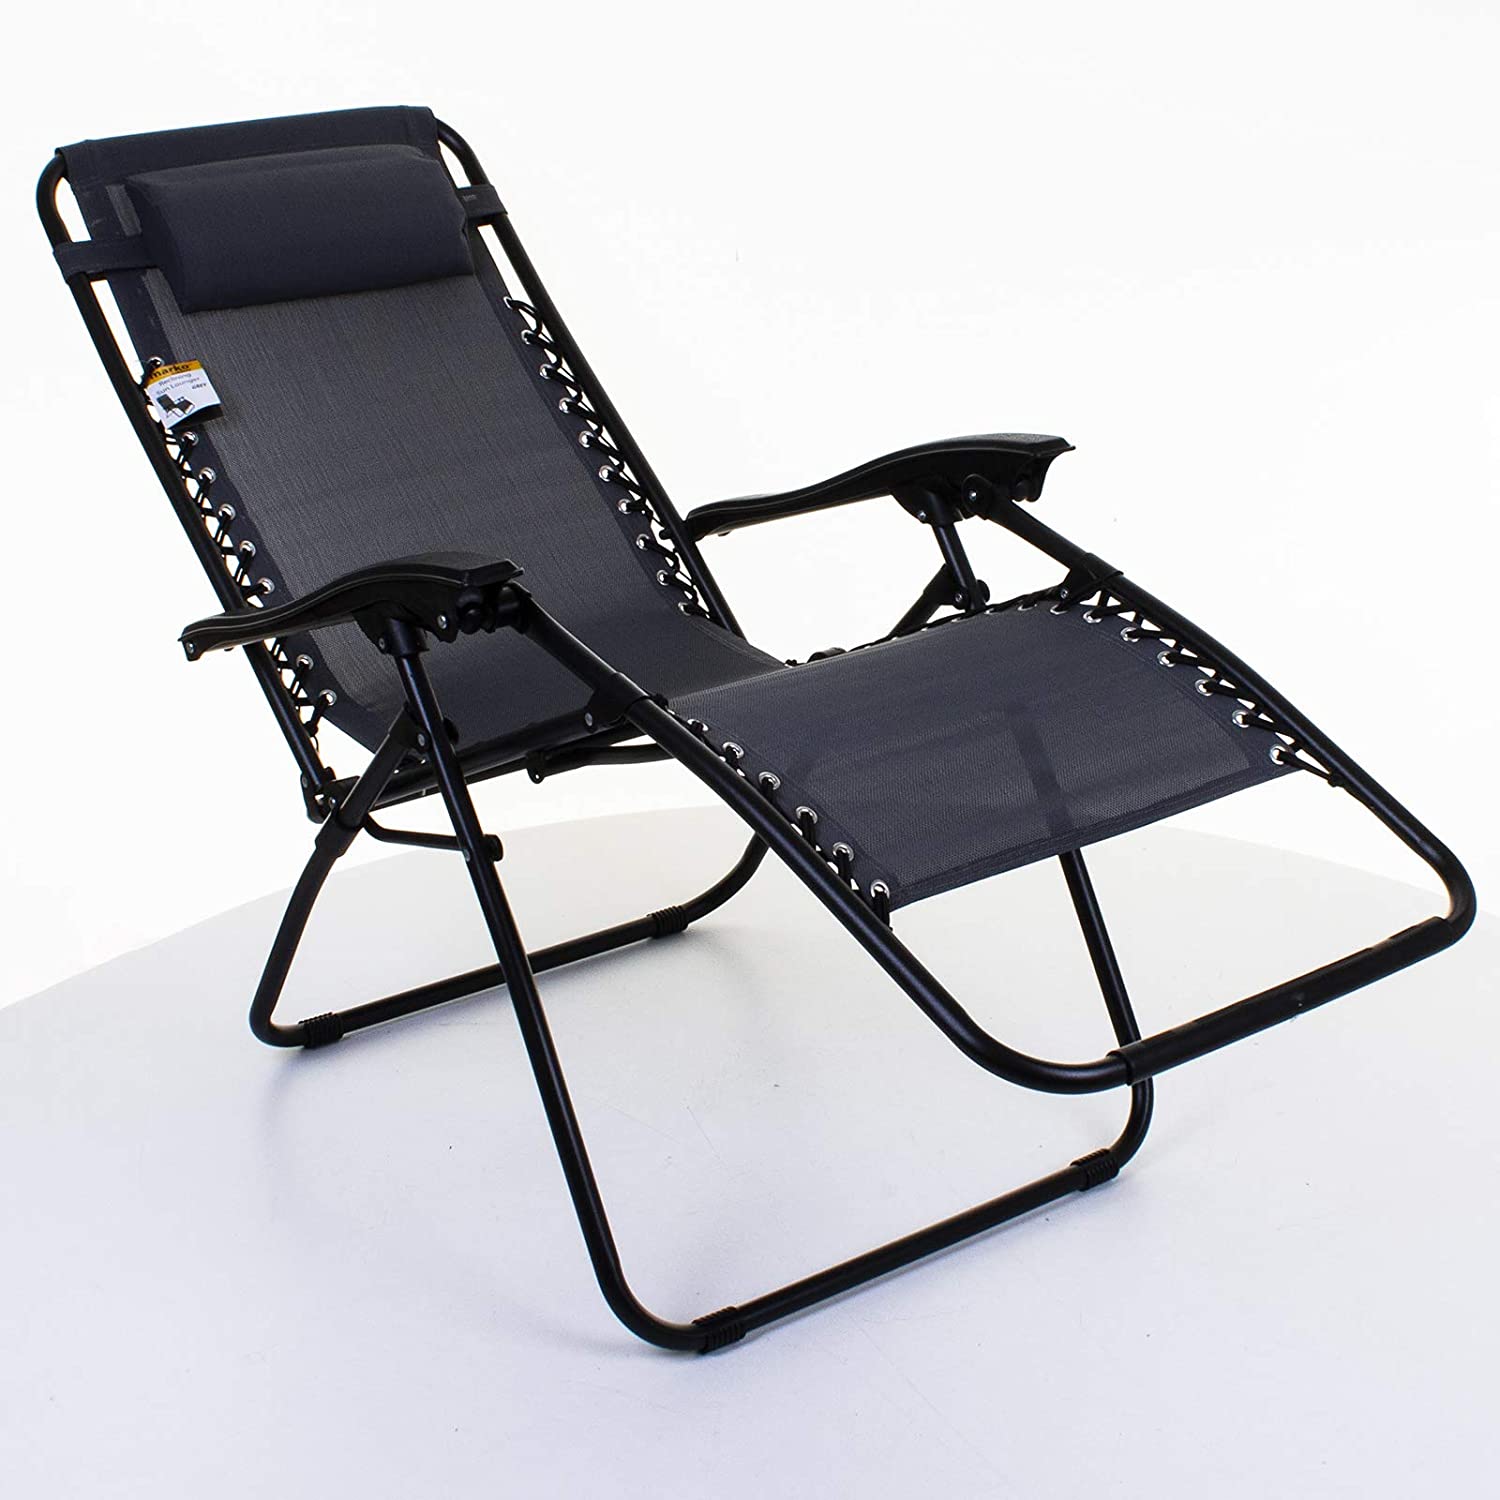 Garden Patio Folding Chairs With Cup And Phone Holder Abaseen Sun Lounger Recliner Zero Gravity Chair